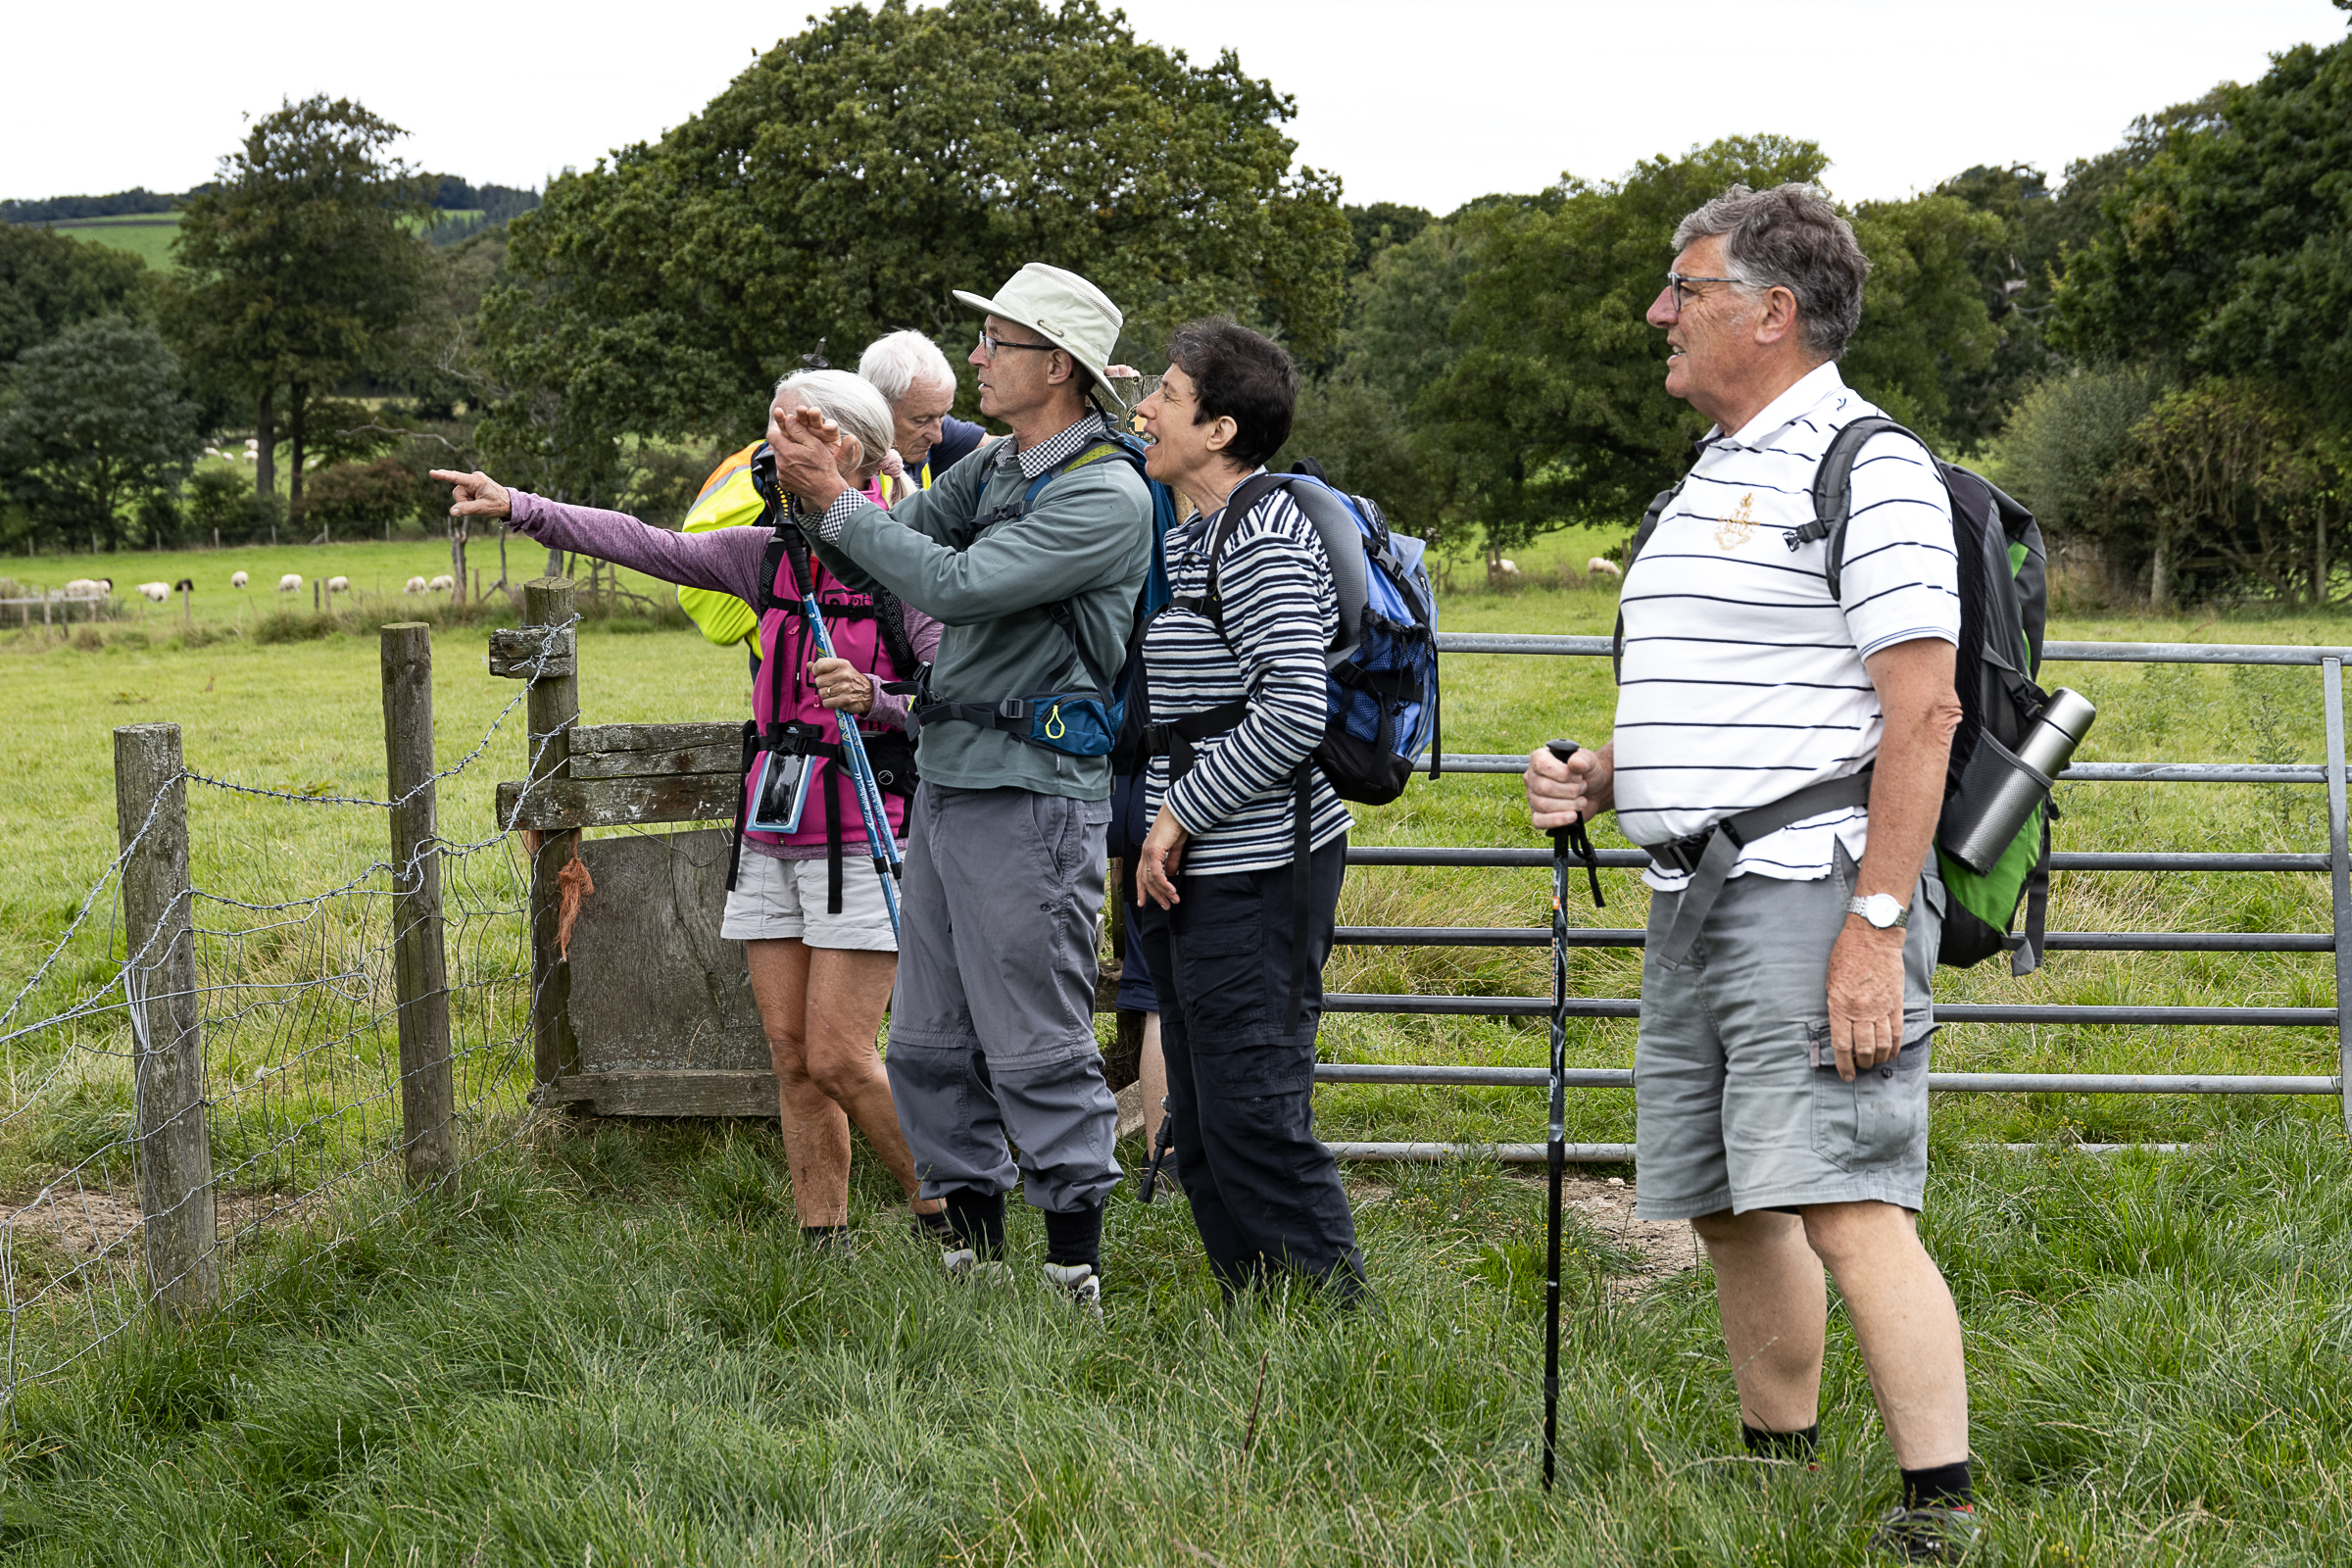 People stood in countryside pointing